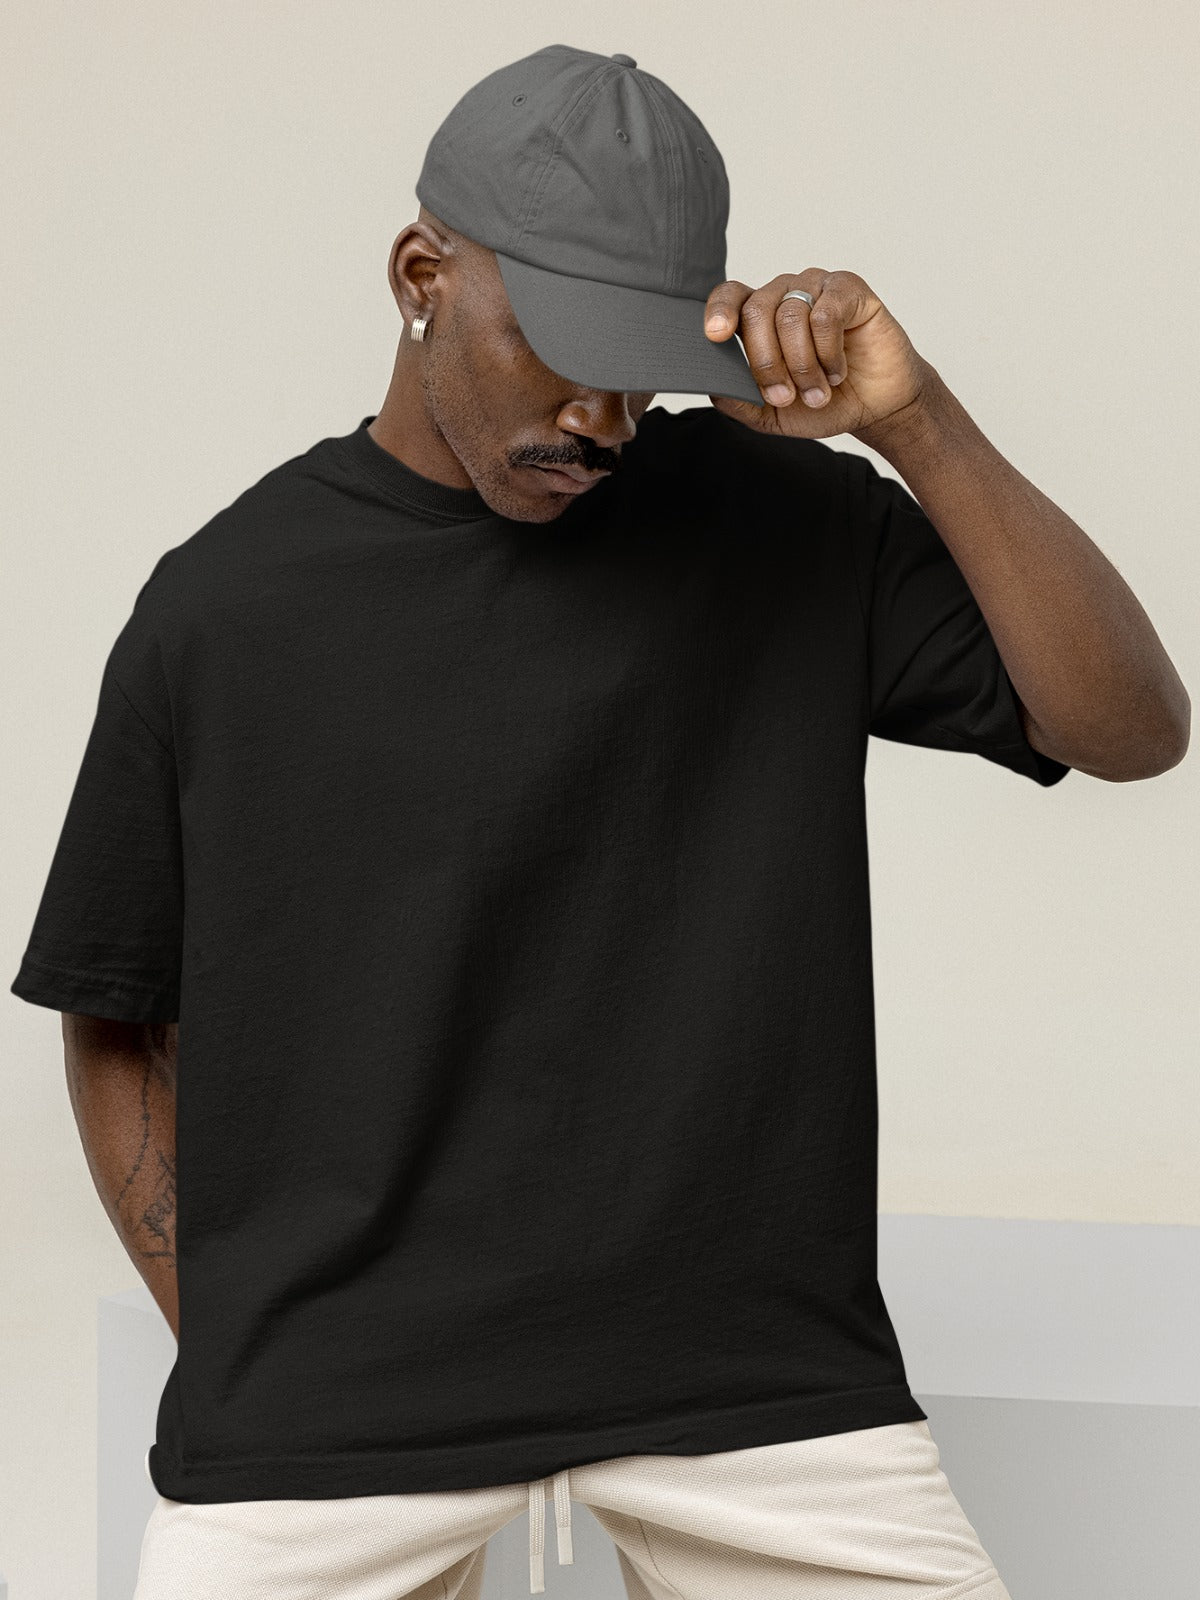 In this captivating image, a stylish black gentleman exudes confidence and charisma. He wears our Premium Heavyweight Black Oversized Tee with effortless coolness. A fashionable baseball cap adds a touch of urban flair to his look, and his downward gaze exudes a sense of contemplation. The tee, in classic black, drapes comfortably, embodying both comfort and a bold, timeless style that perfectly complements his individuality.